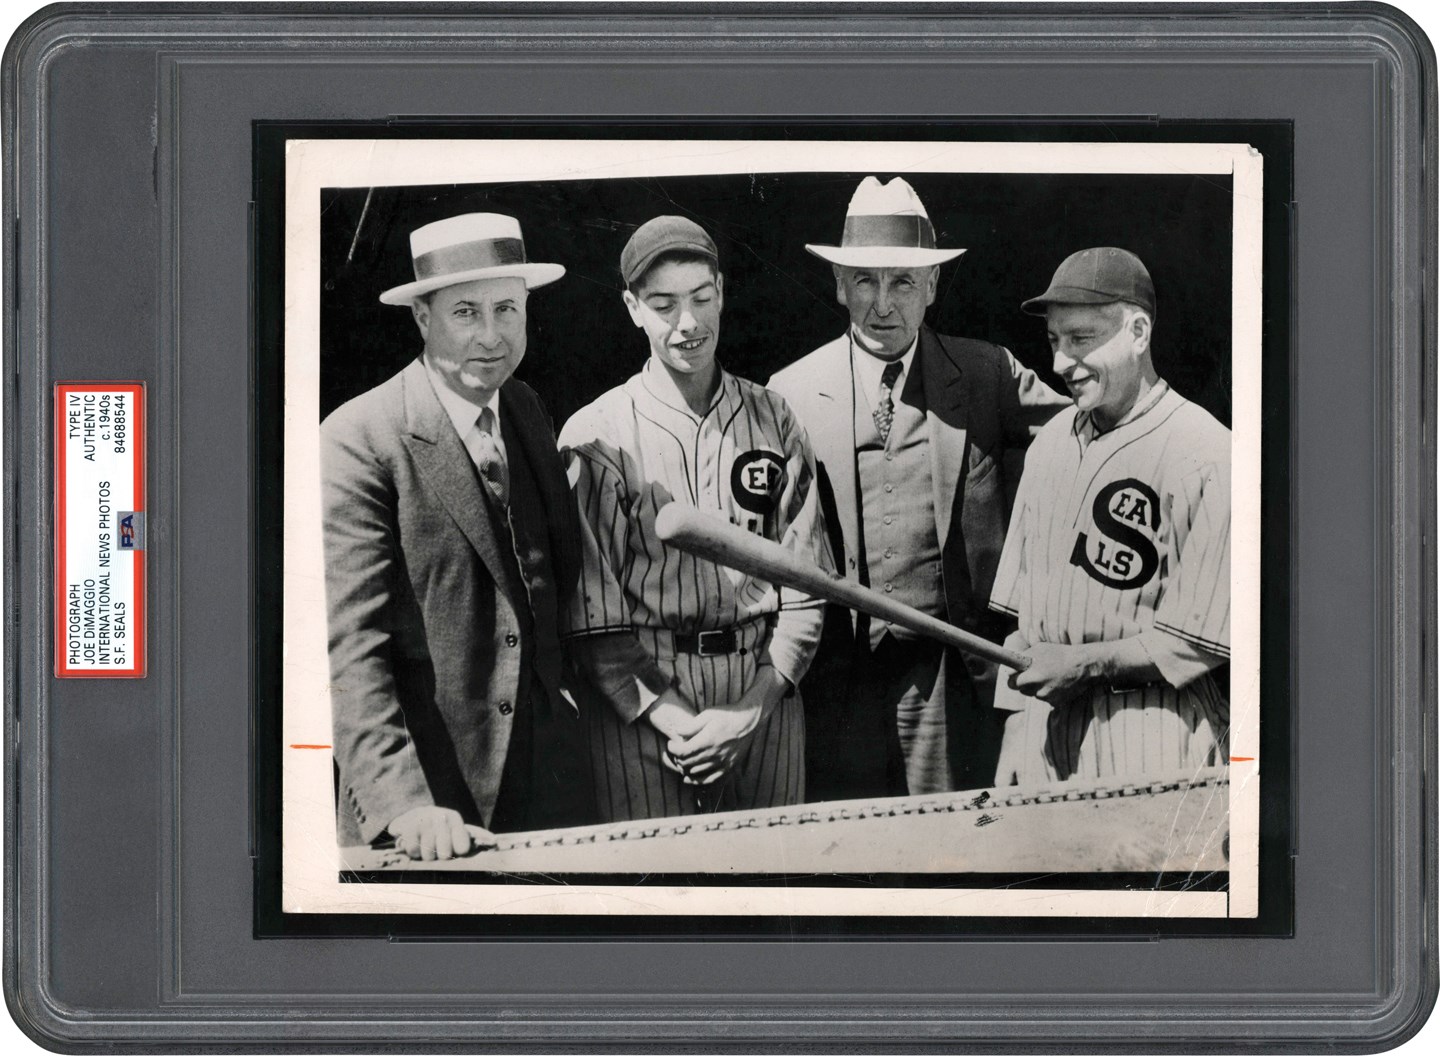 - One of the Earliest Known Professional Baseball Photographs of Joe DiMaggio (PSA Type IV)